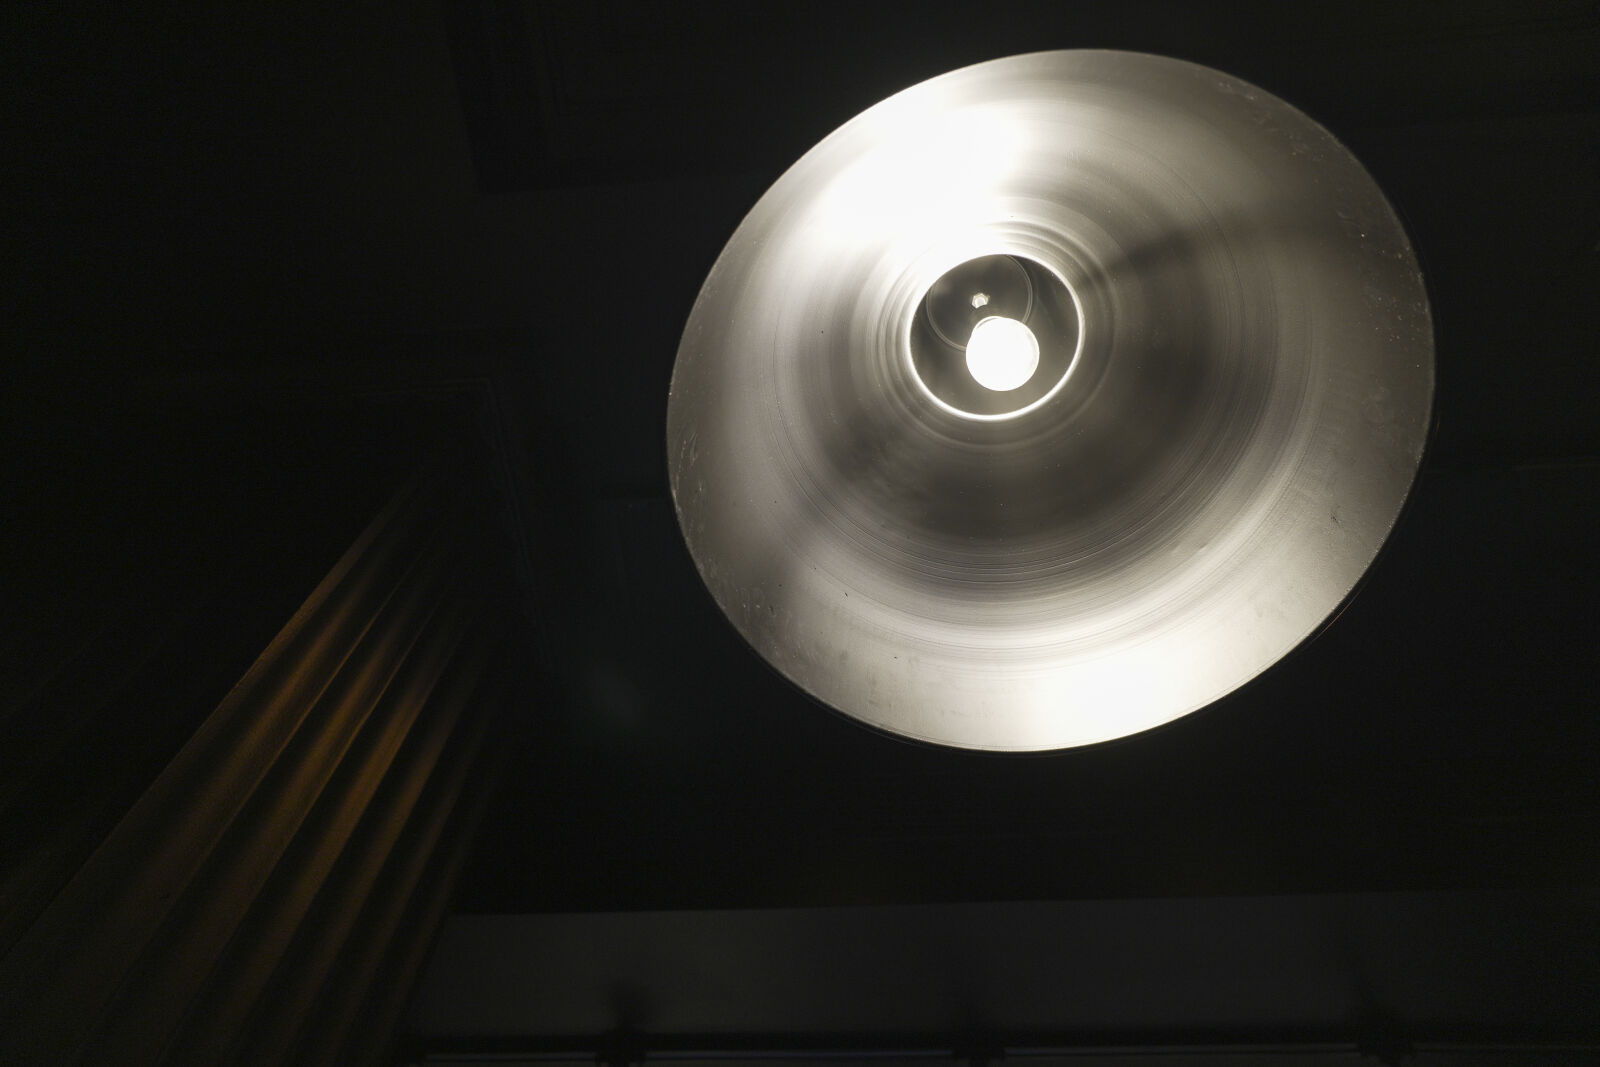 Sony FX30 sample photo. Ceiling lamp photography